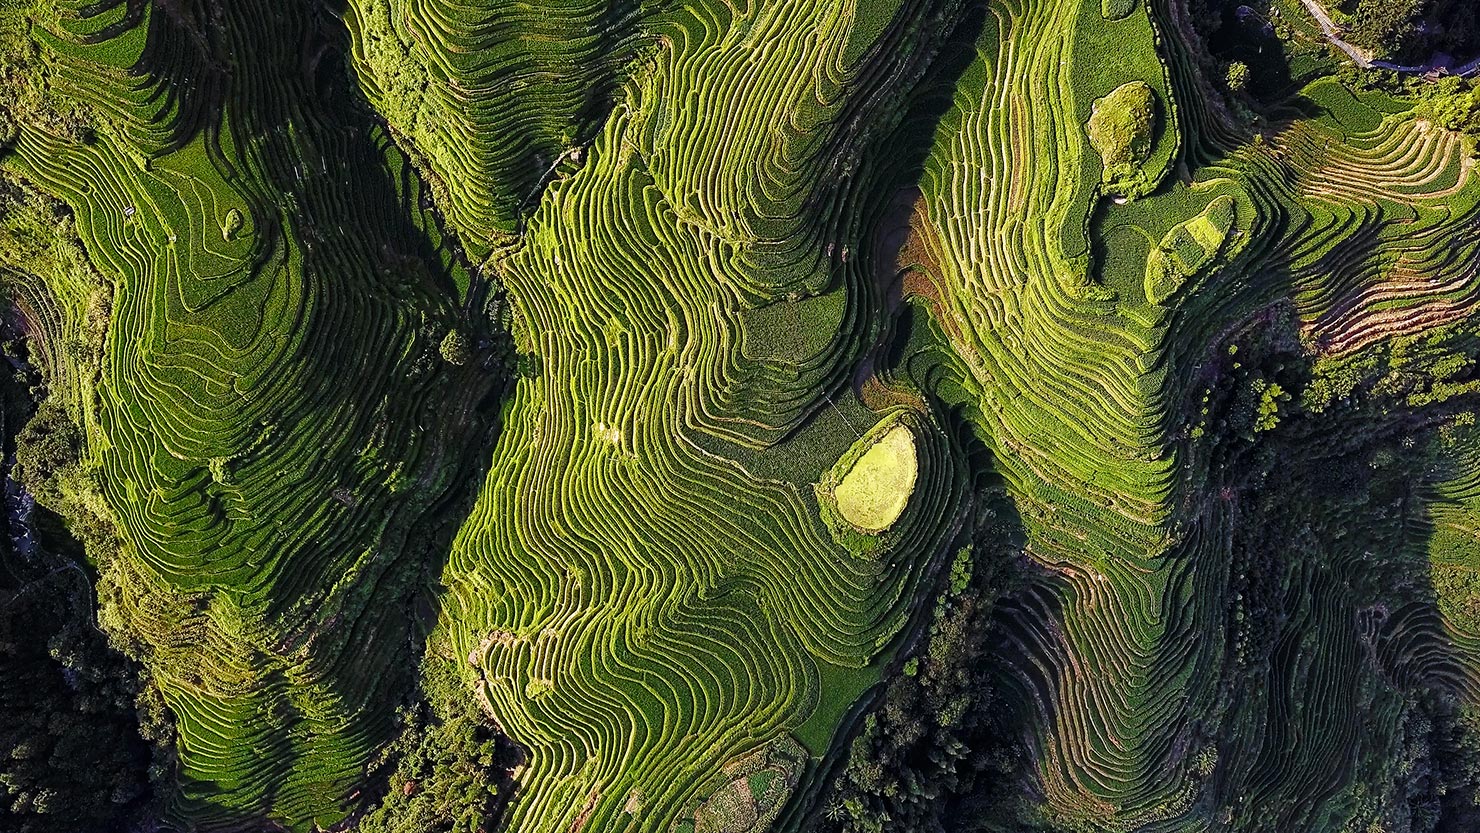 LongJi Long Ji Rice Terrace Above China Fields Paddy Drone Aerial Photography Licensed Operator FAA Part 107 CAA PfCO Commercial Operations Hire Commission Paul Reiffer Professional